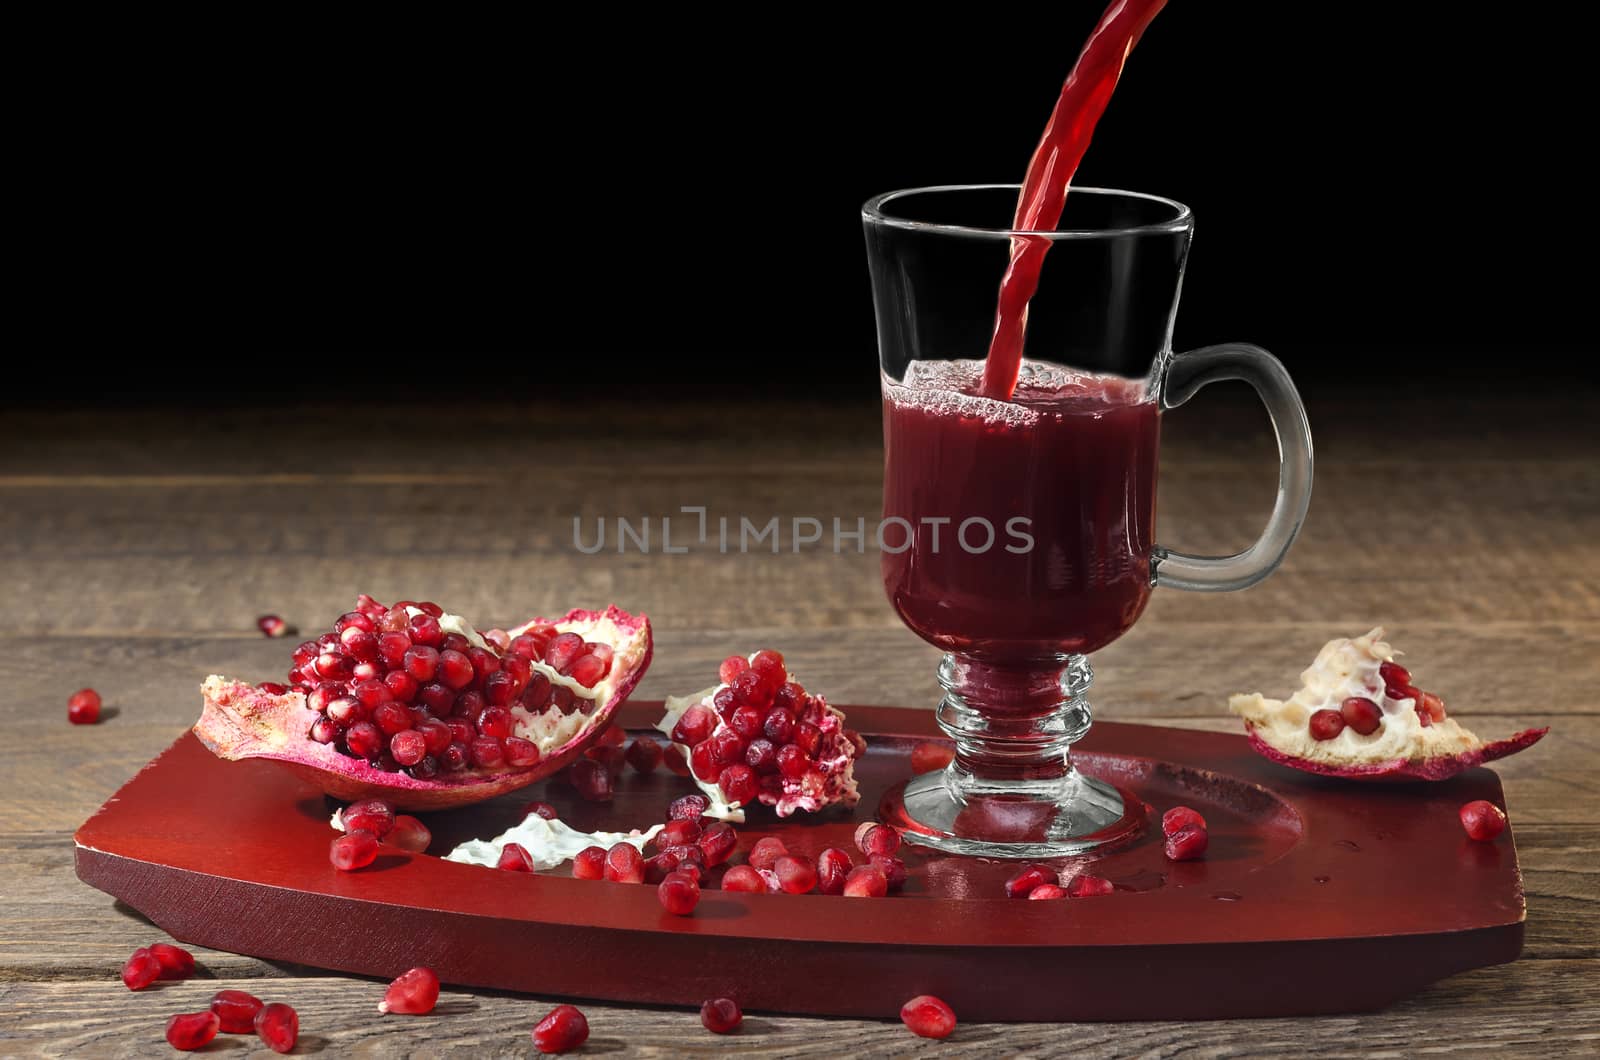 Pomegranate juice is poured into a glass Cup, wooden surface and black background. Pieces and pomegranate seeds on a tray. Selective focus.